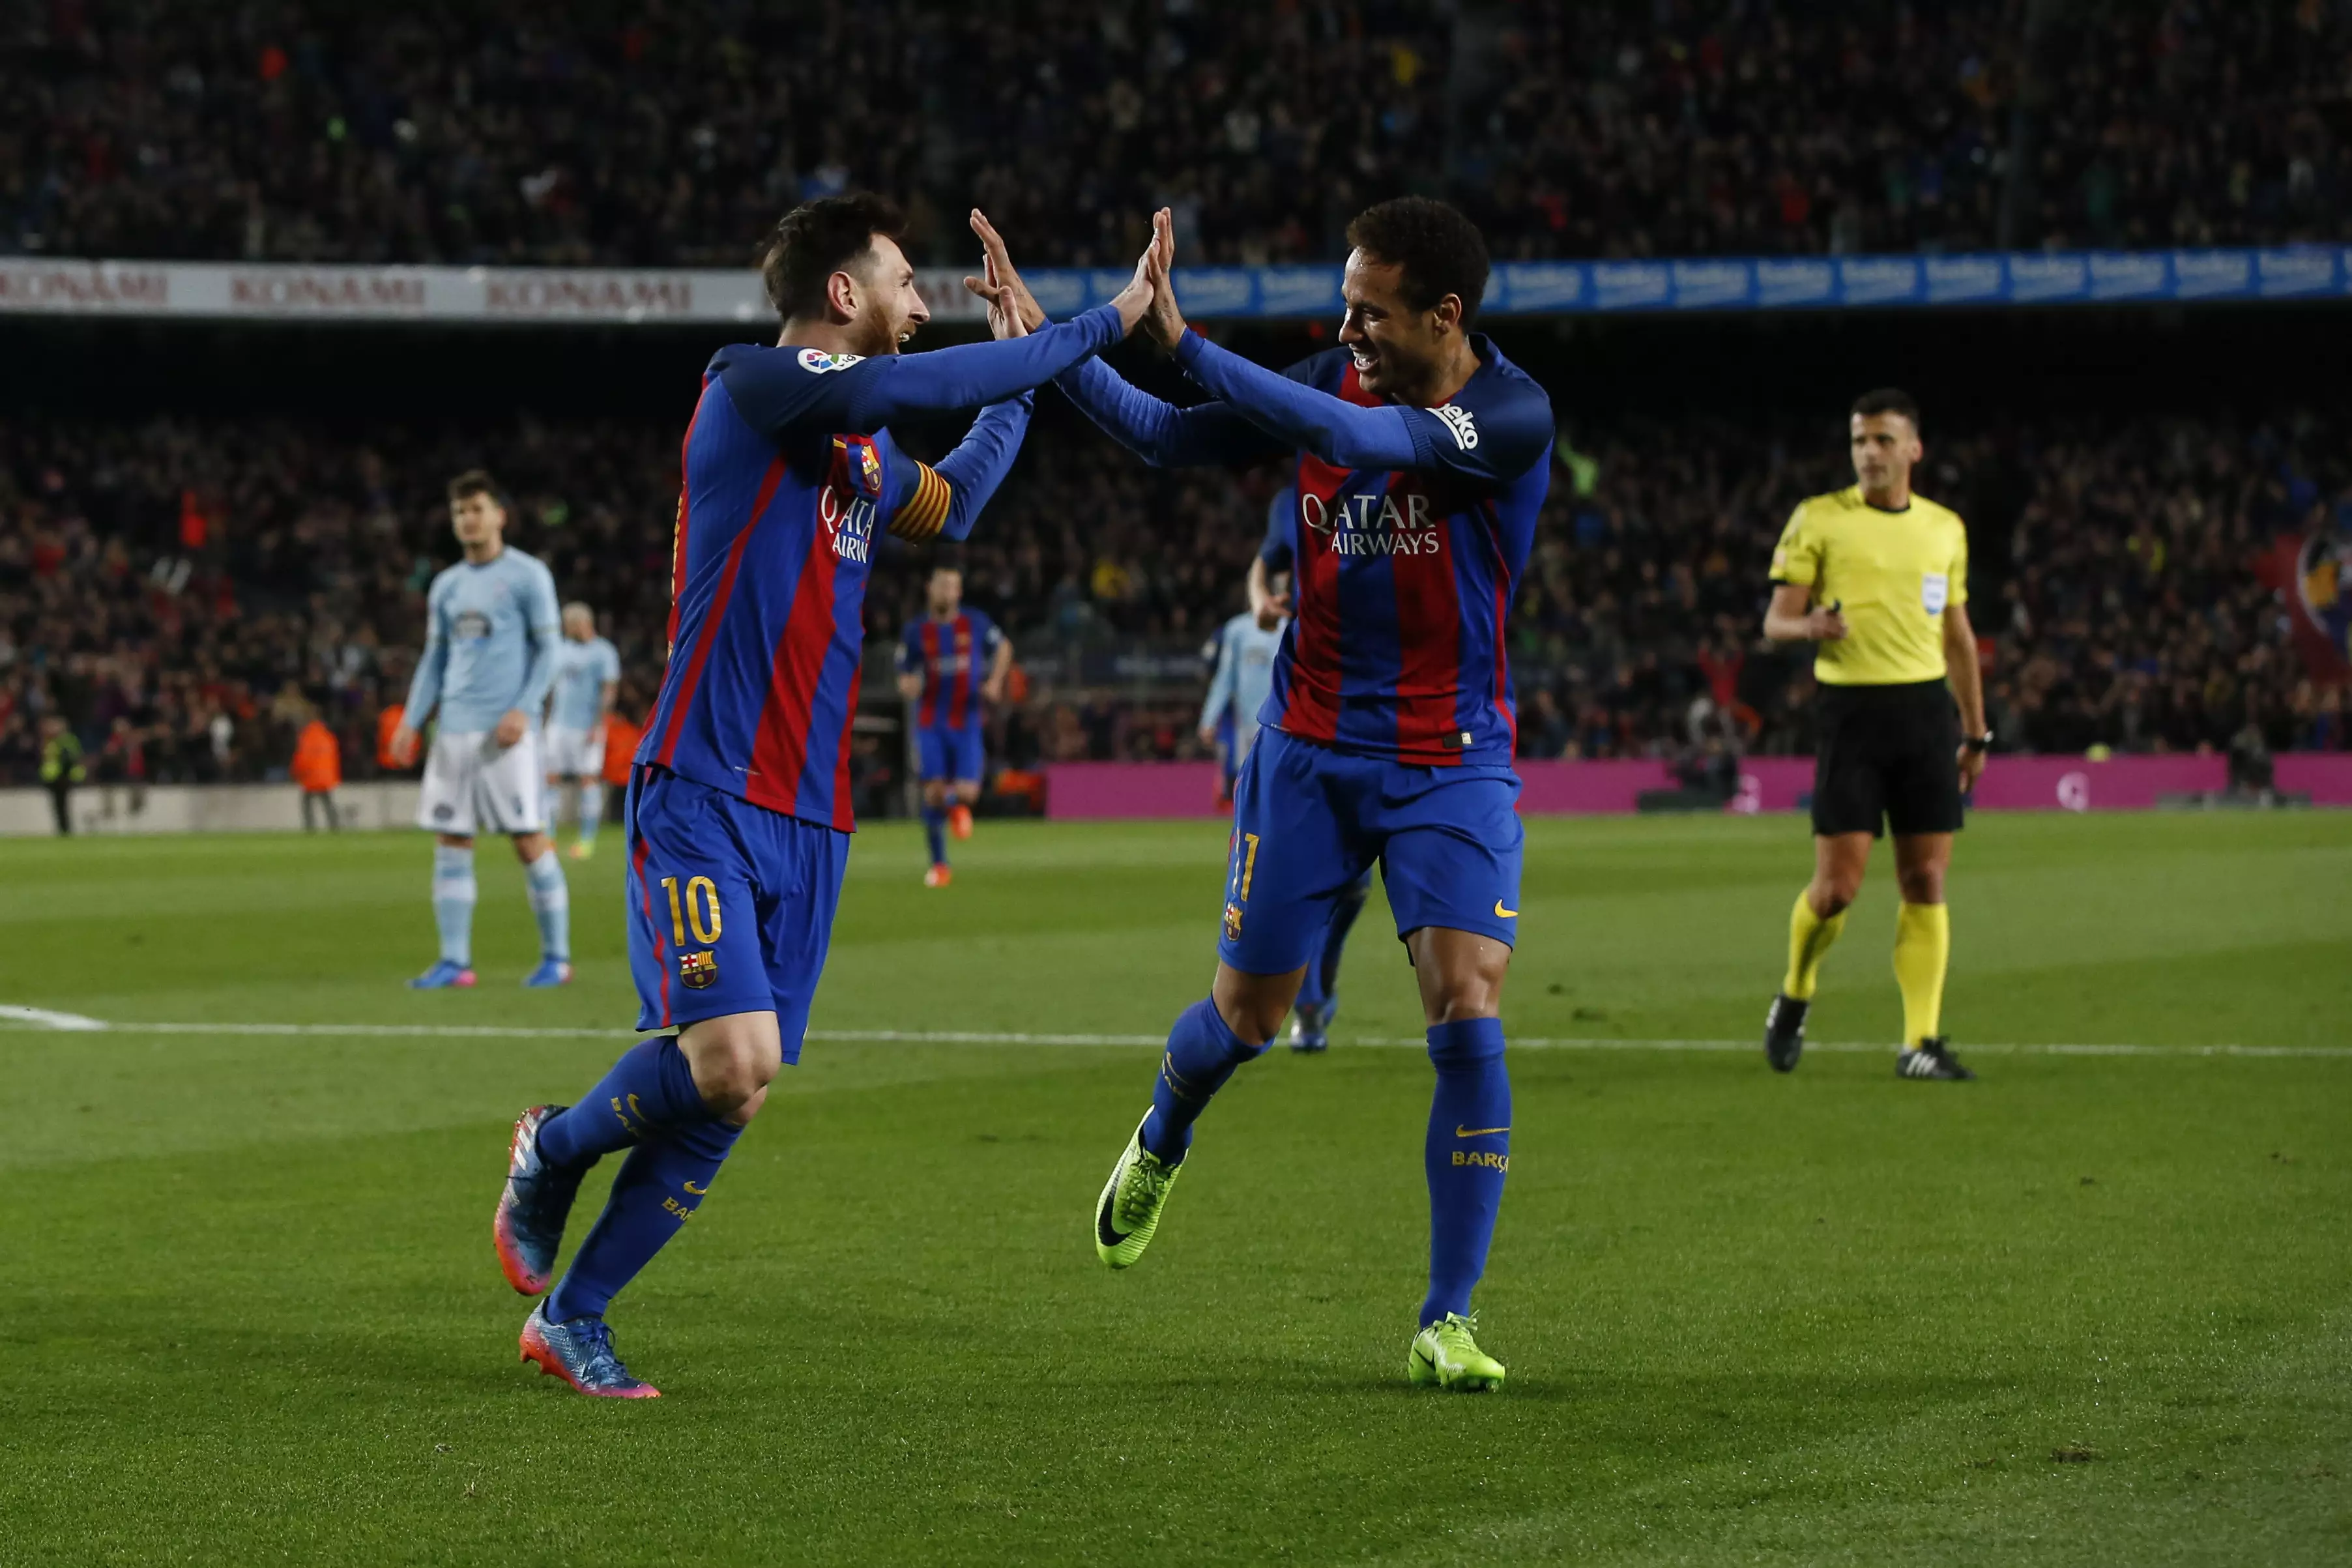 Neymar and Messi had a great partnership at Barcelona. Image: PA Images